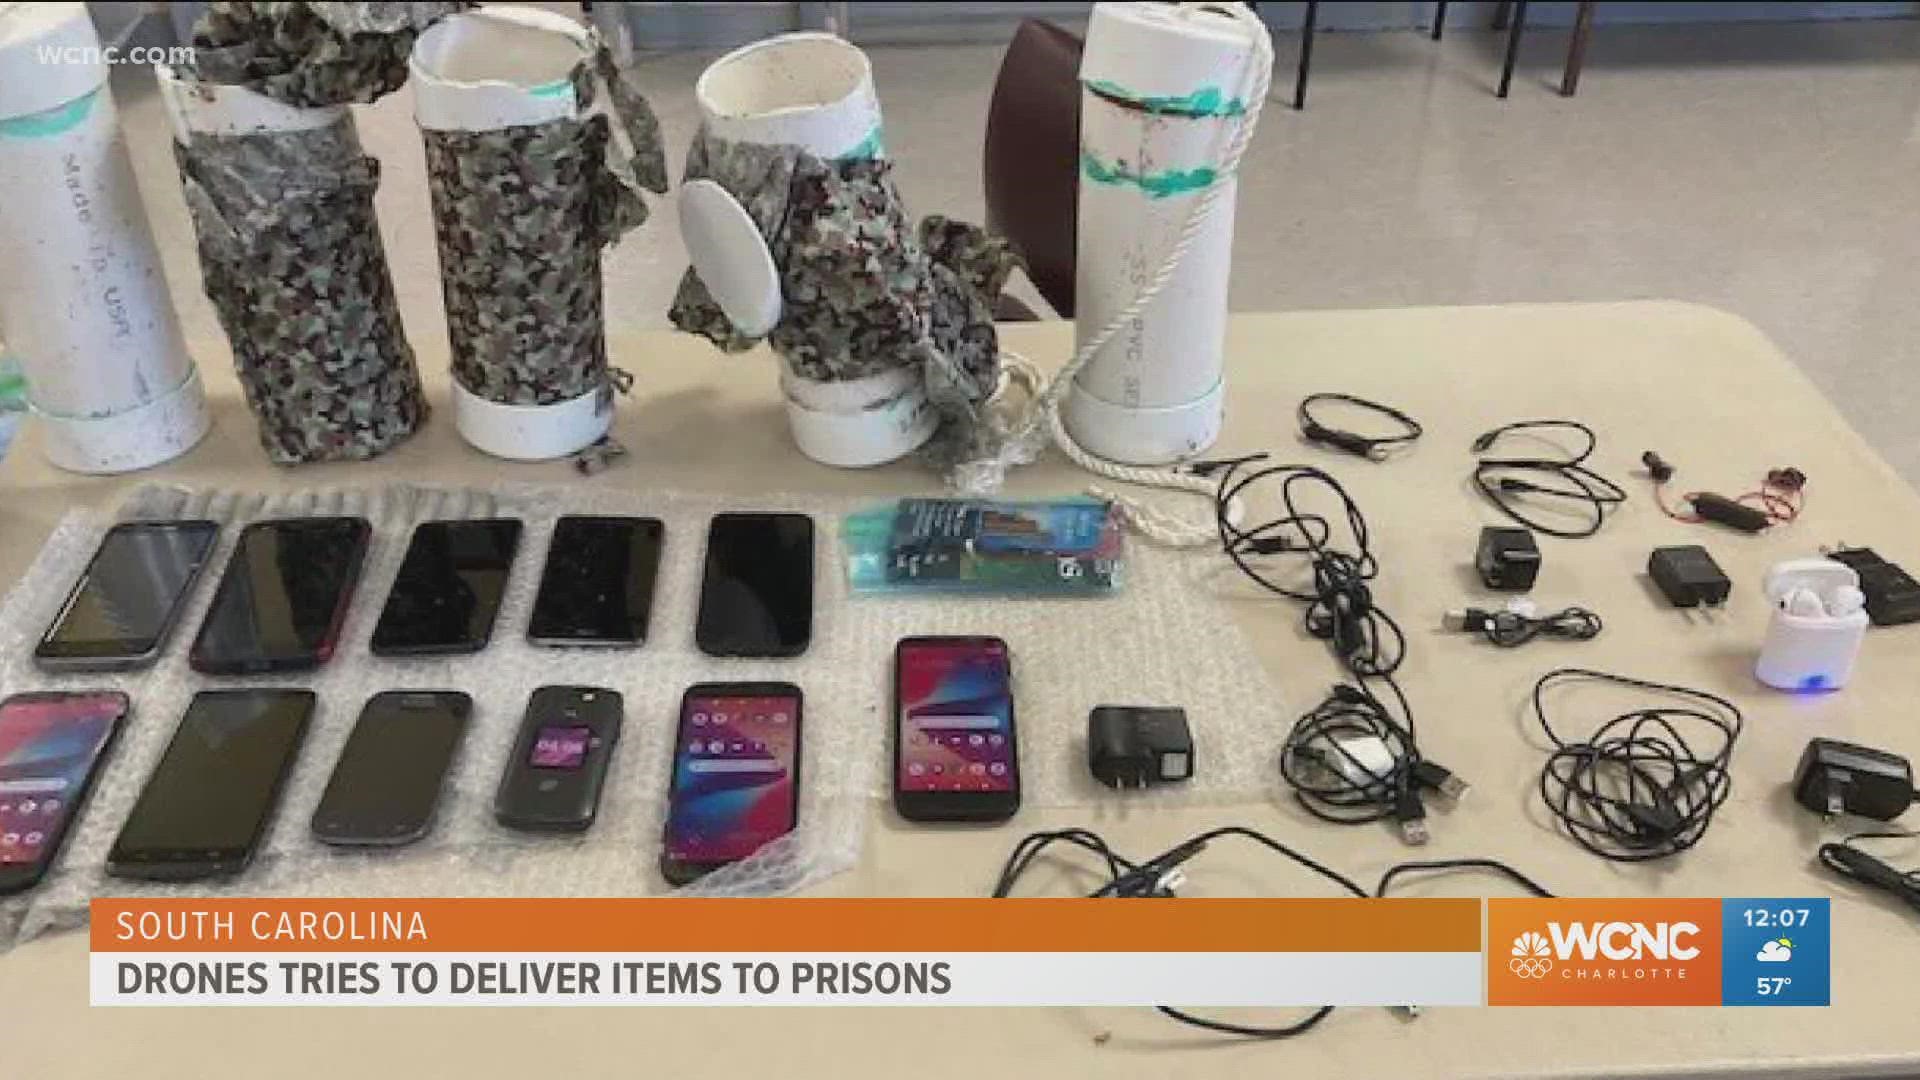 State officials say inmates are using drones to smuggle smartphones, tobacco and other banned items into prisons across South Carolina.